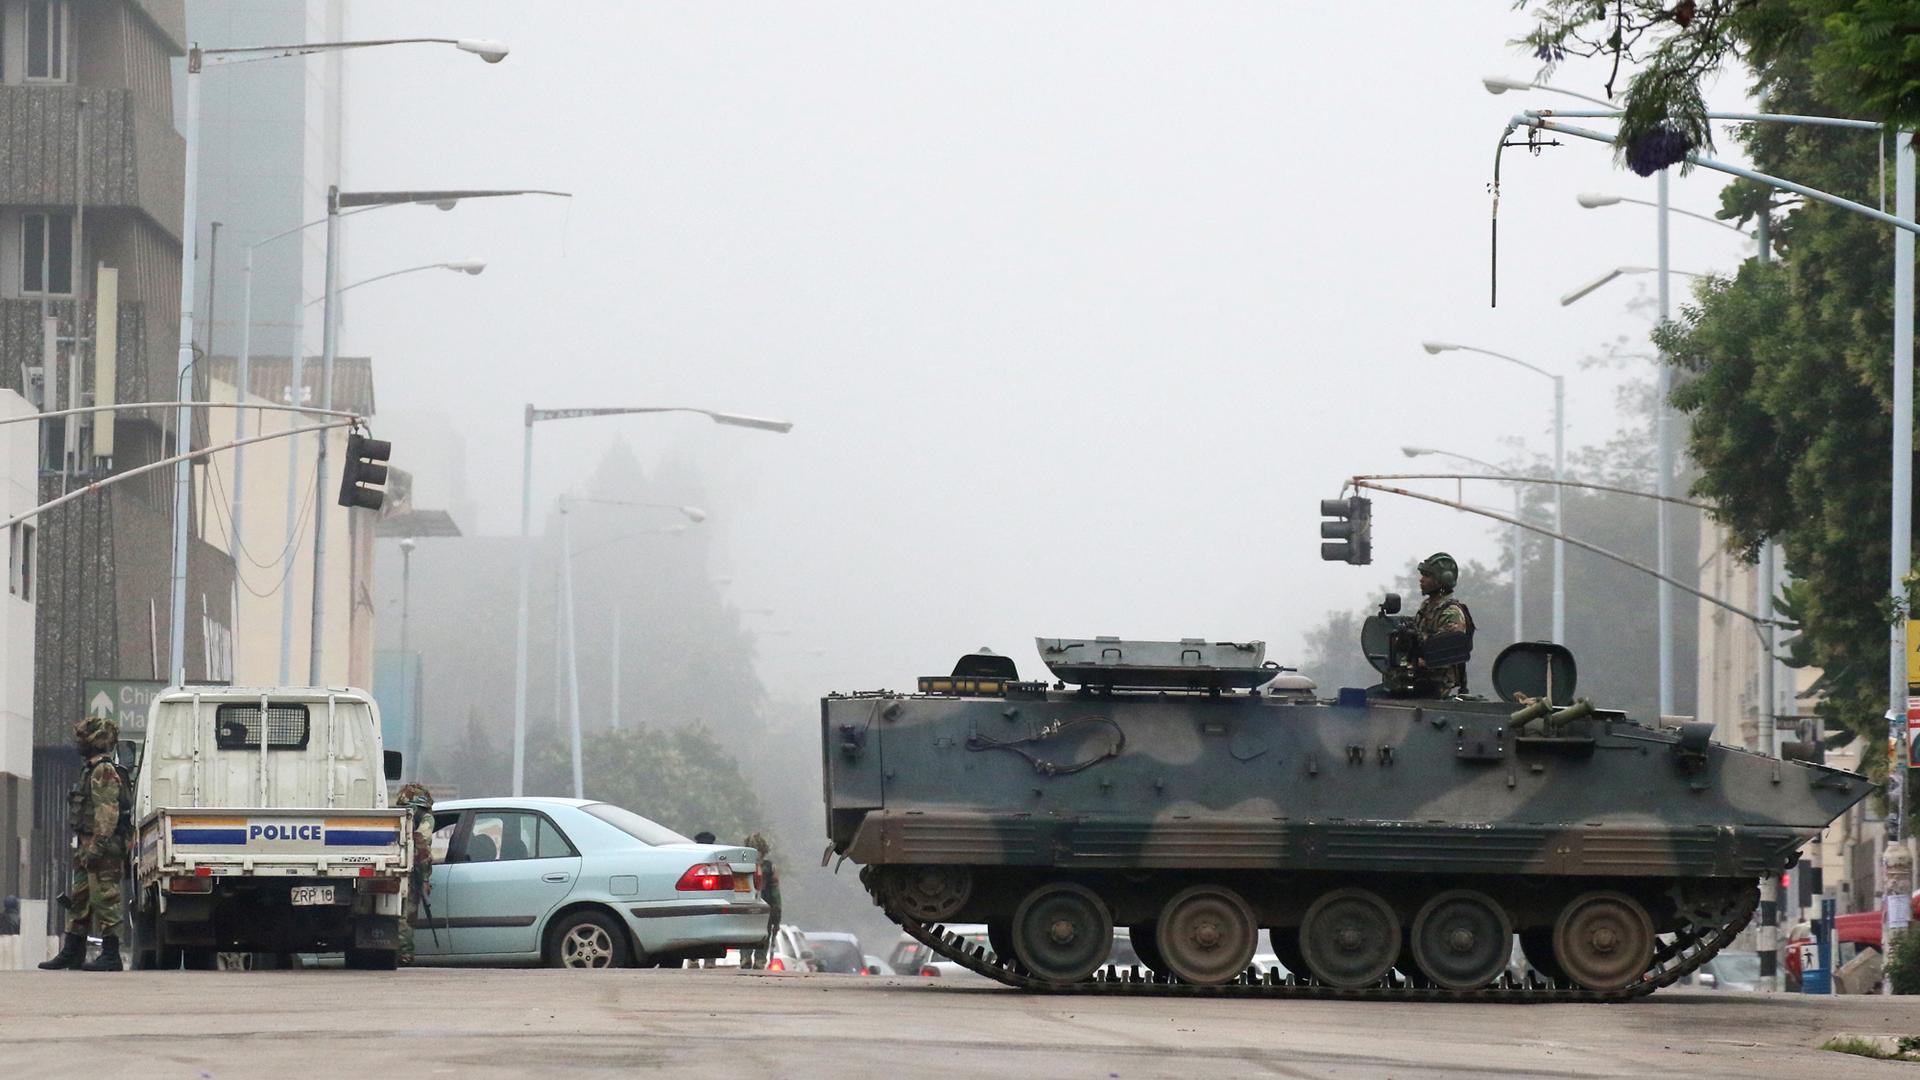 A tank with a soldier standing up on top is parked in the middle of the street in Harare, Zimbabwe,